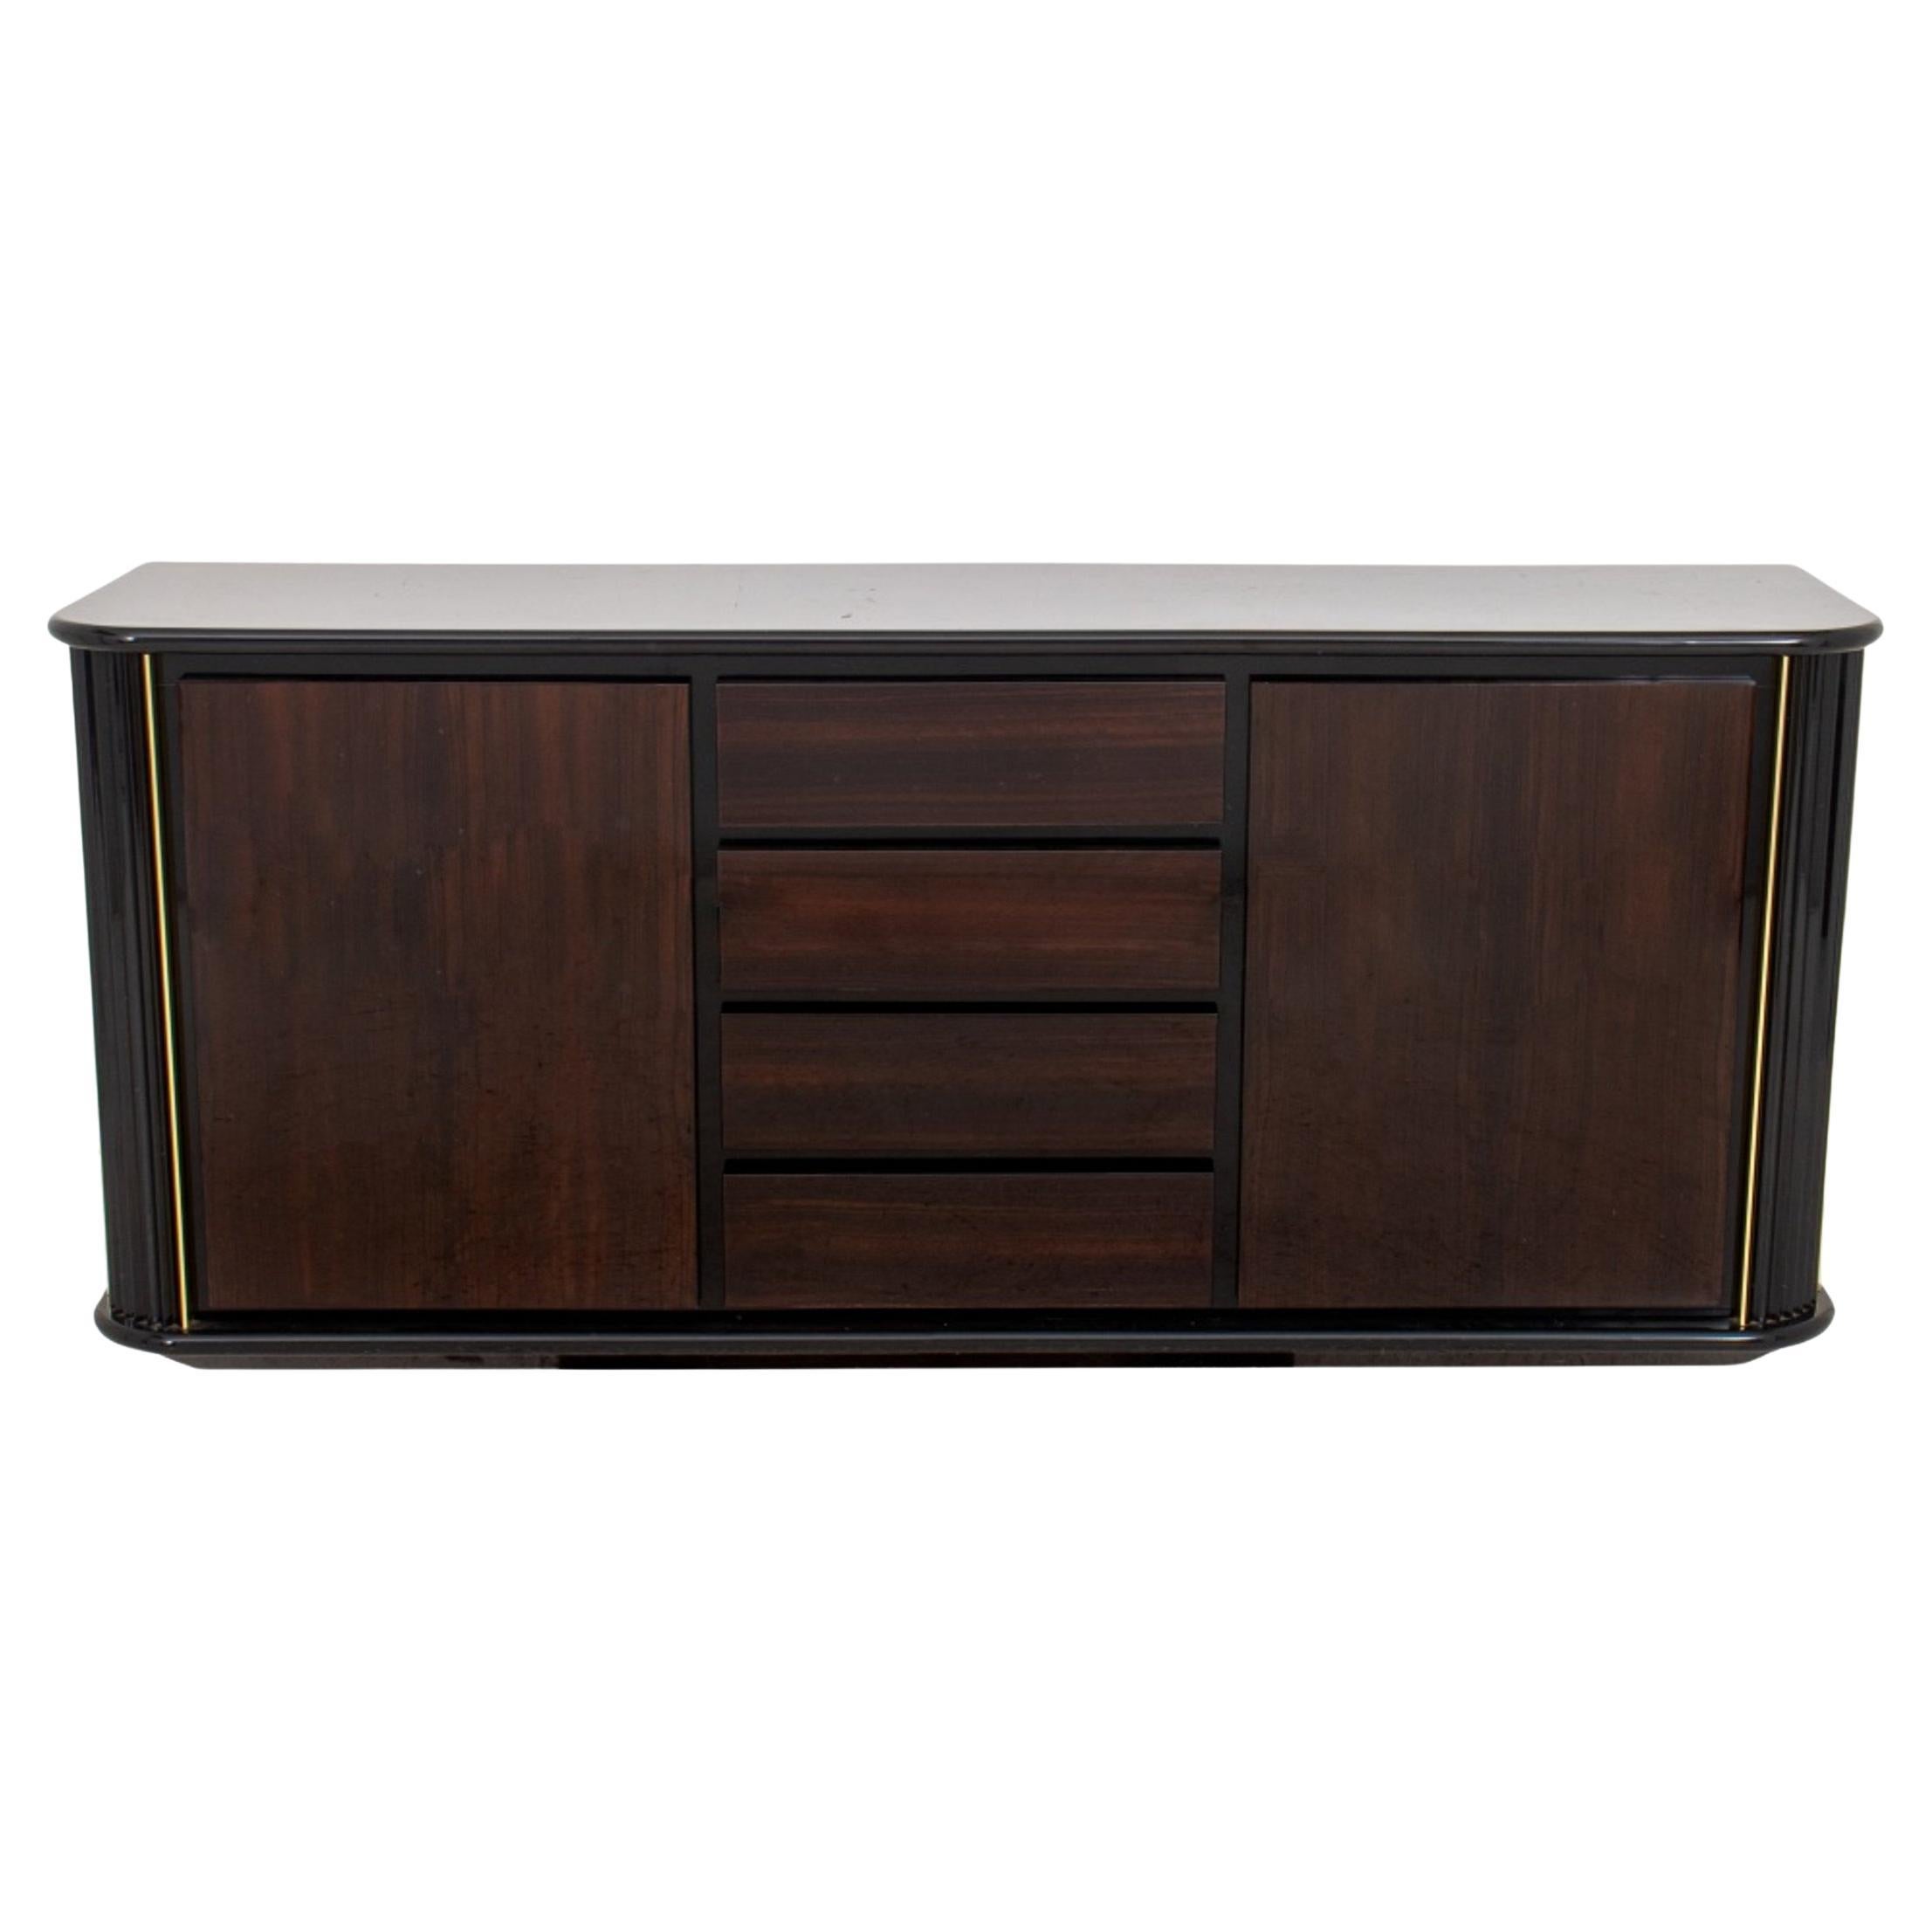 Italian Lacquered Faux Rosewood Credenza, 1980s For Sale